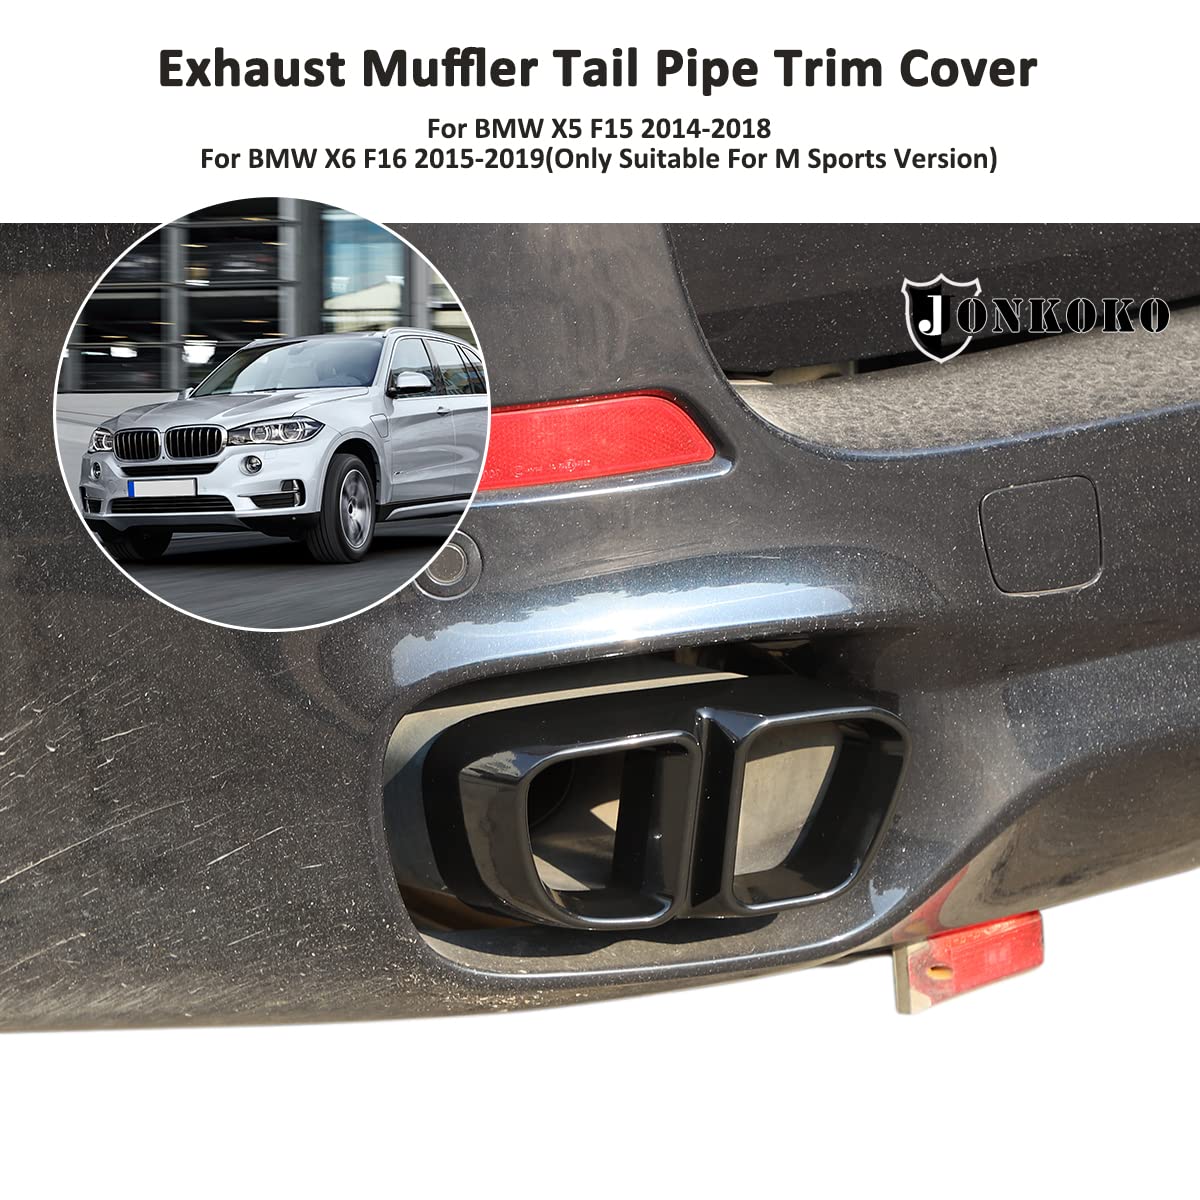 Aluminum Alloy Exterior Accessories Exhaust Muffler Tail Pipe Trim Cover For BMW X5 F15 X6 F16 2014-2019(Suitable For M Sports Version) (Bright Black)